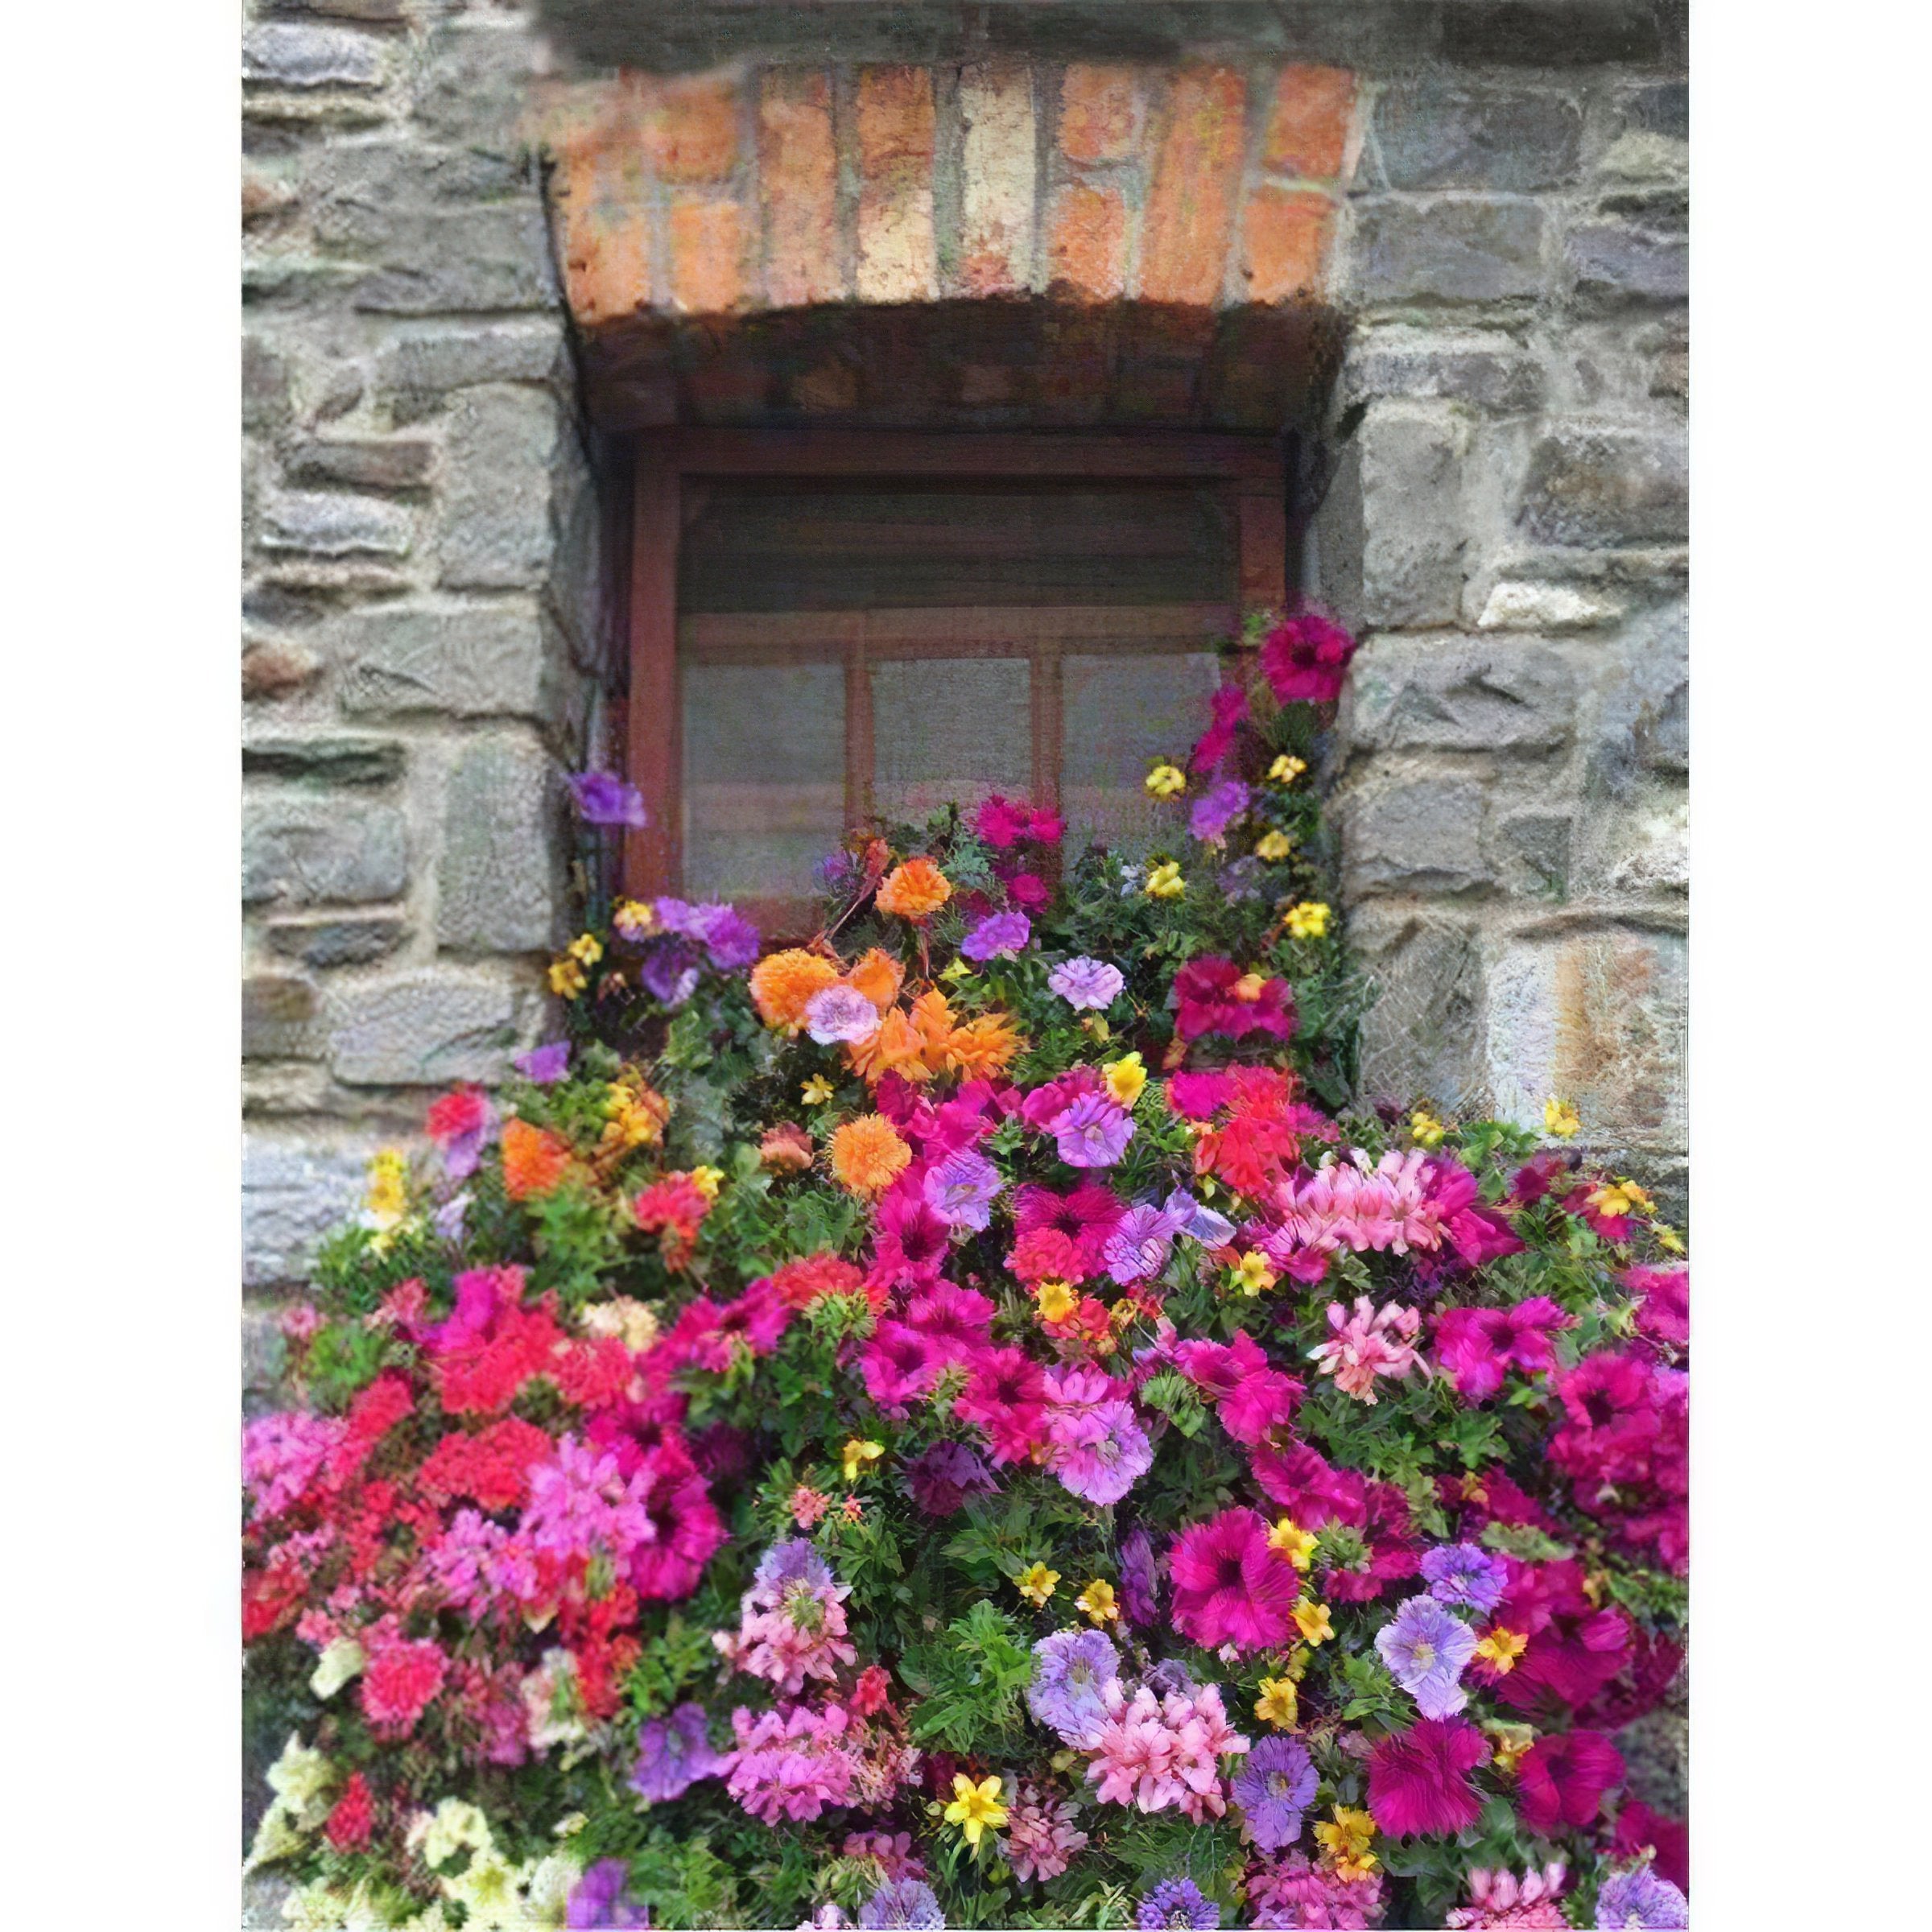 Brighten your view with a rainbow of colored flowers on a window sill. Colored Flowers On Window Sill - Diamondartlove